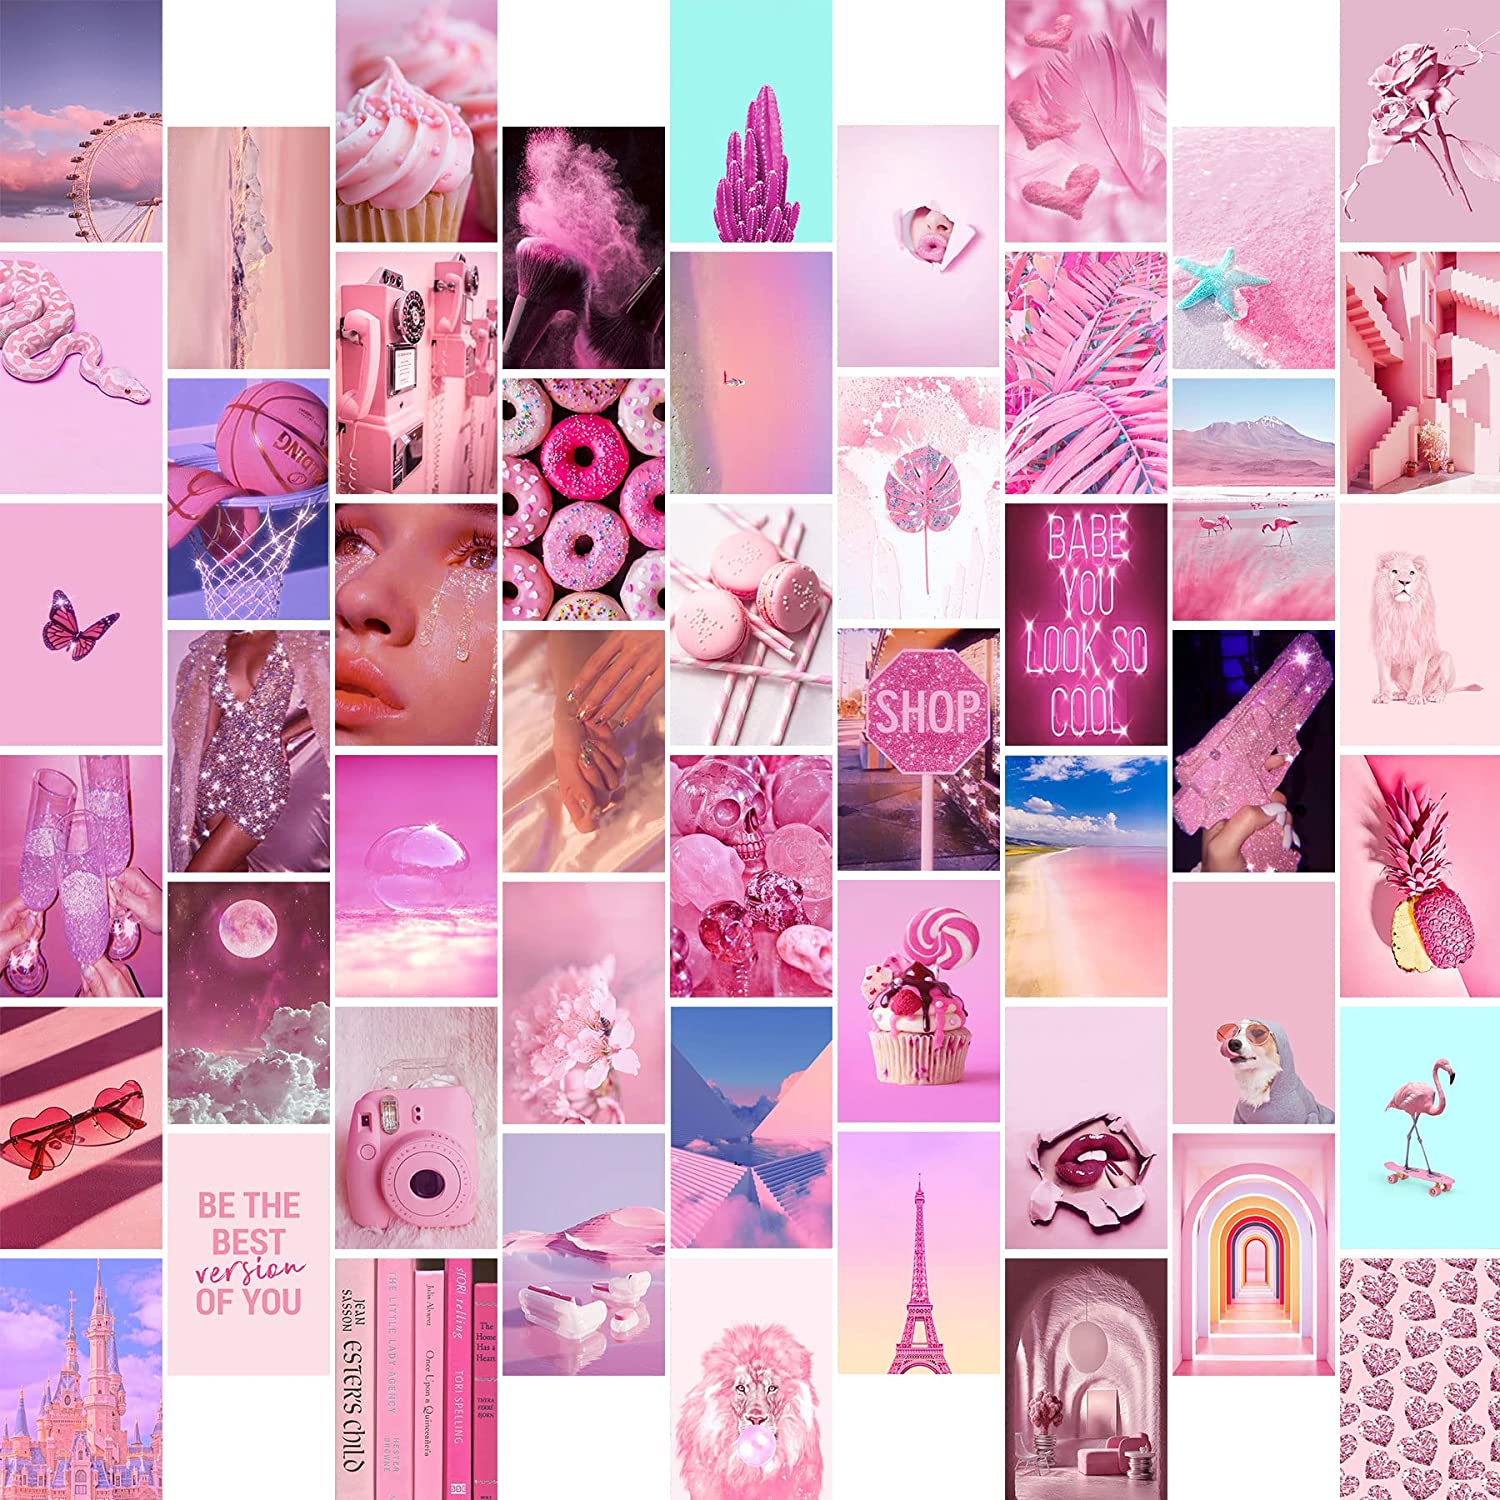 Pink aesthetic wall collage kit for girls room decor, 50 photos, pink and blue, pink and purple, flamingo, for a girly bedroom, teen room decor, photo wall, pink aesthetic pictures - Pink collage